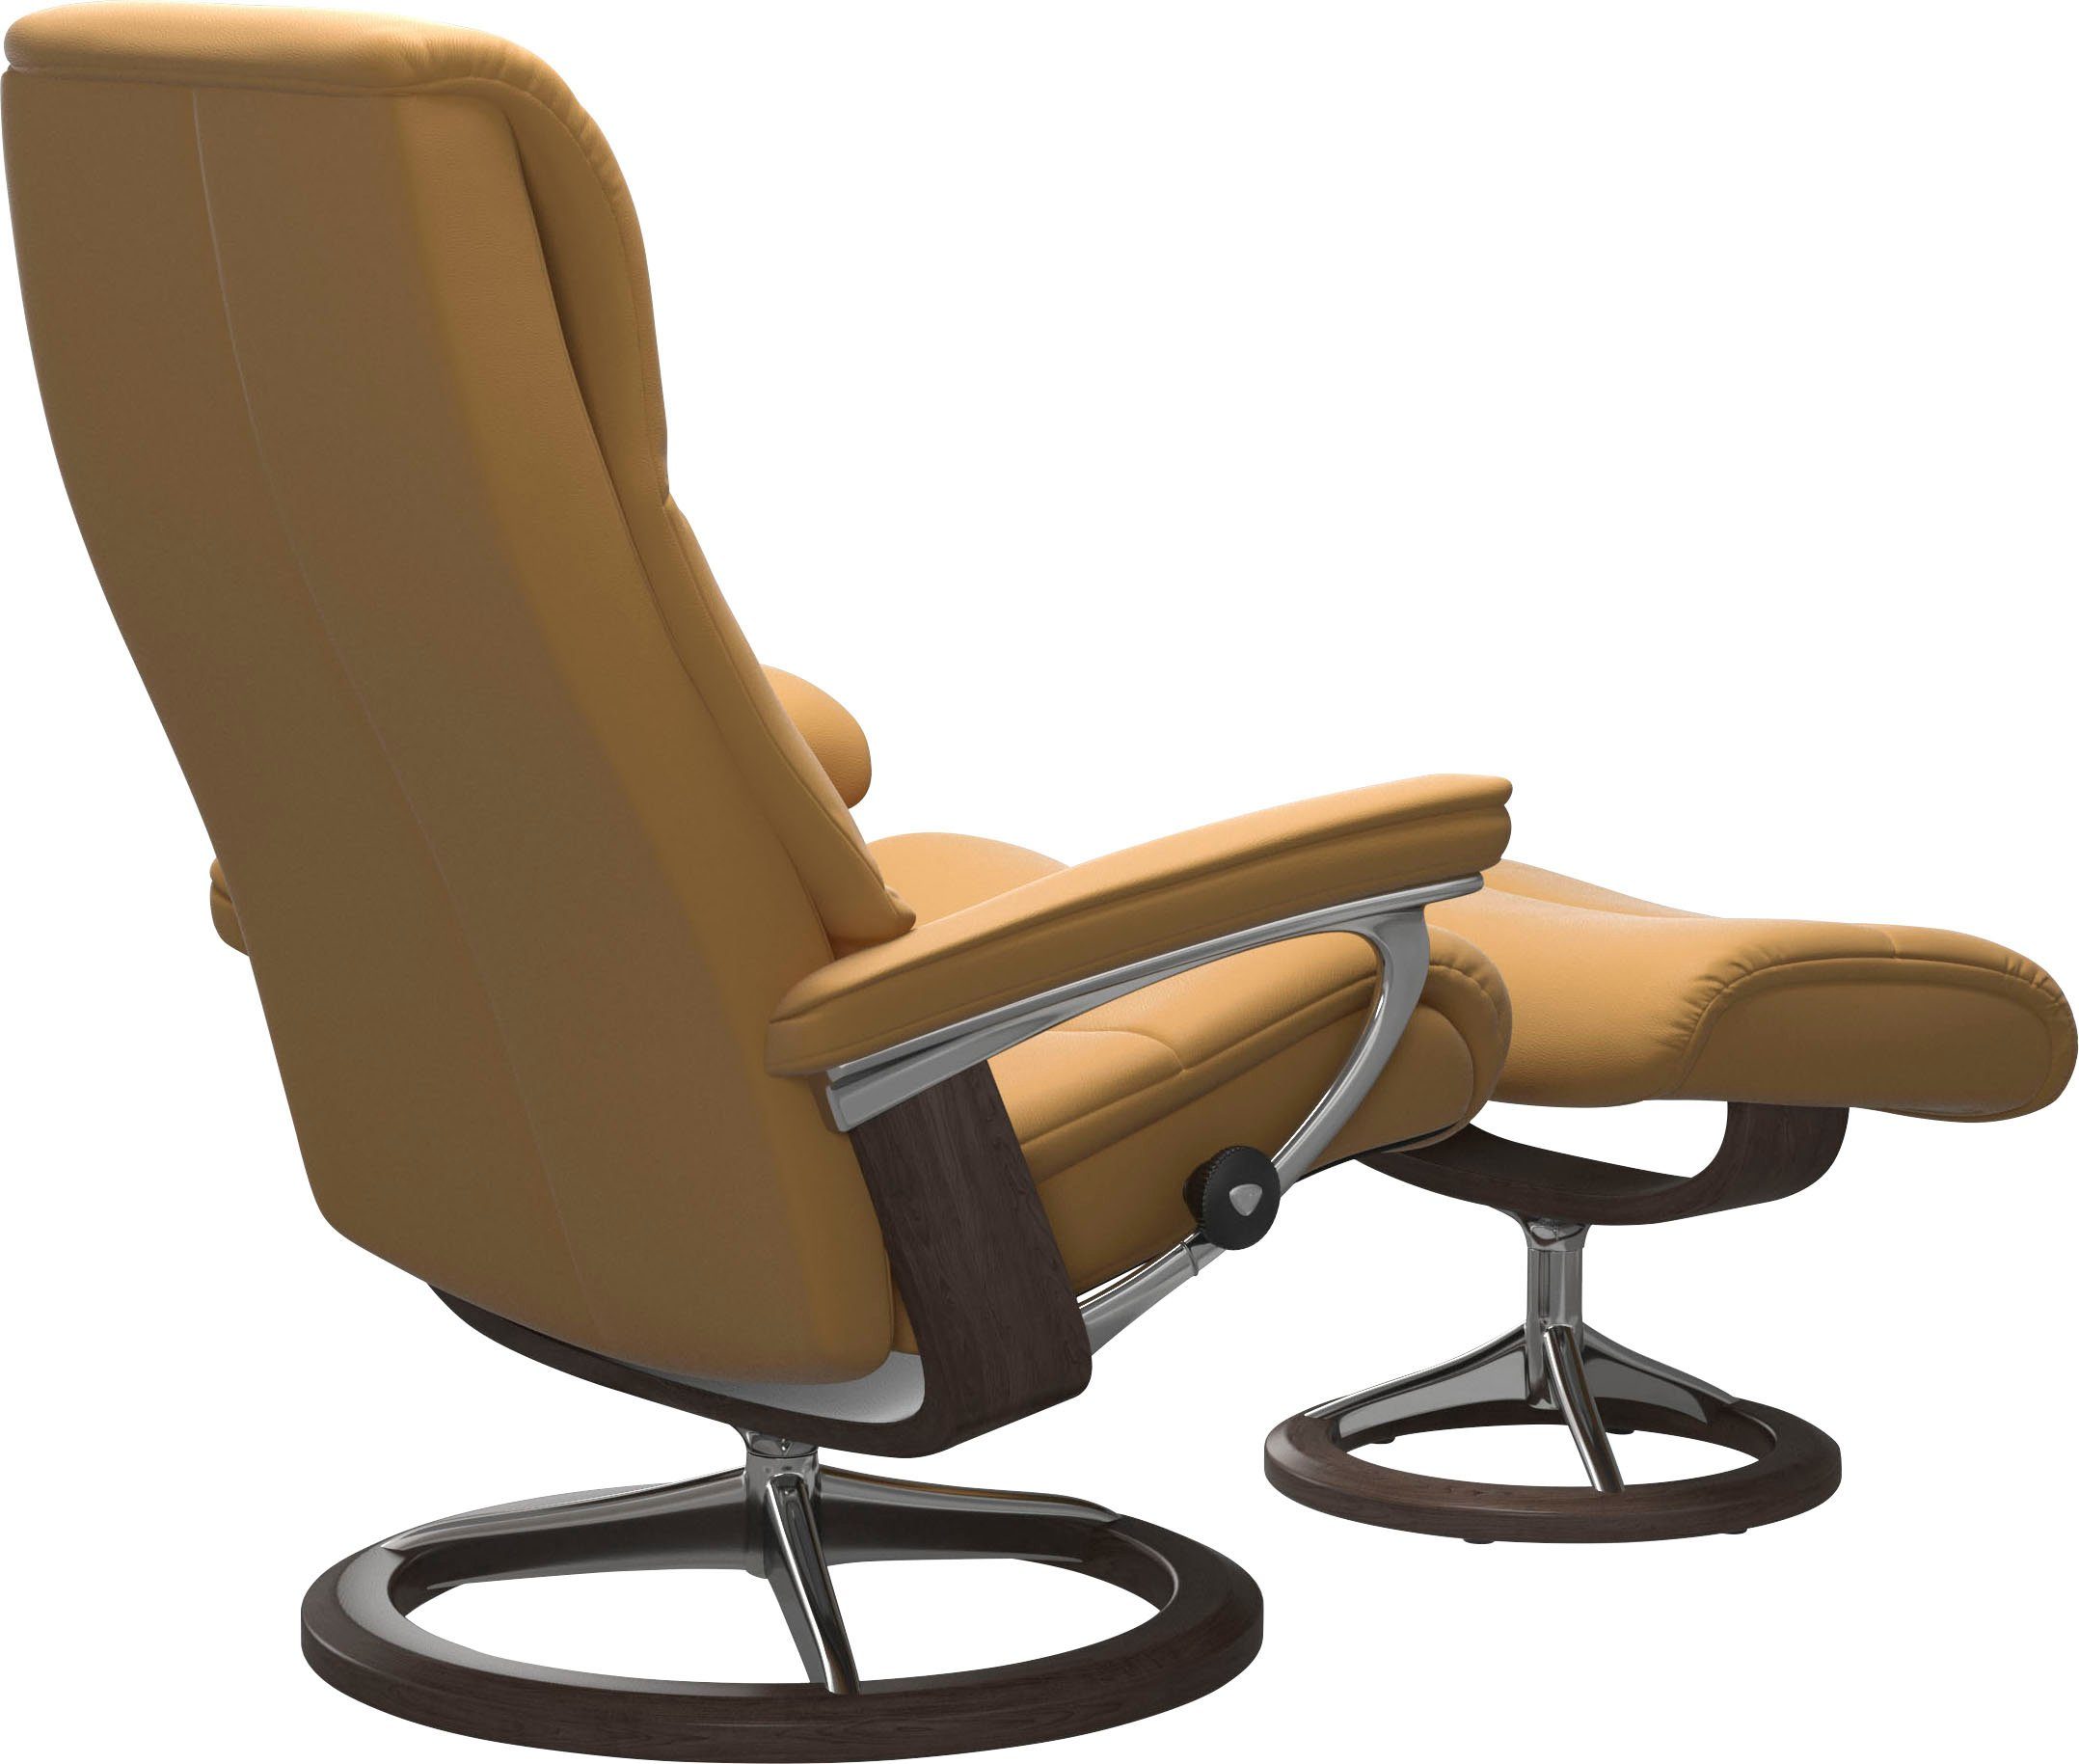 Signature S,Gestell Relaxsessel mit Größe Stressless® Base, View, Wenge